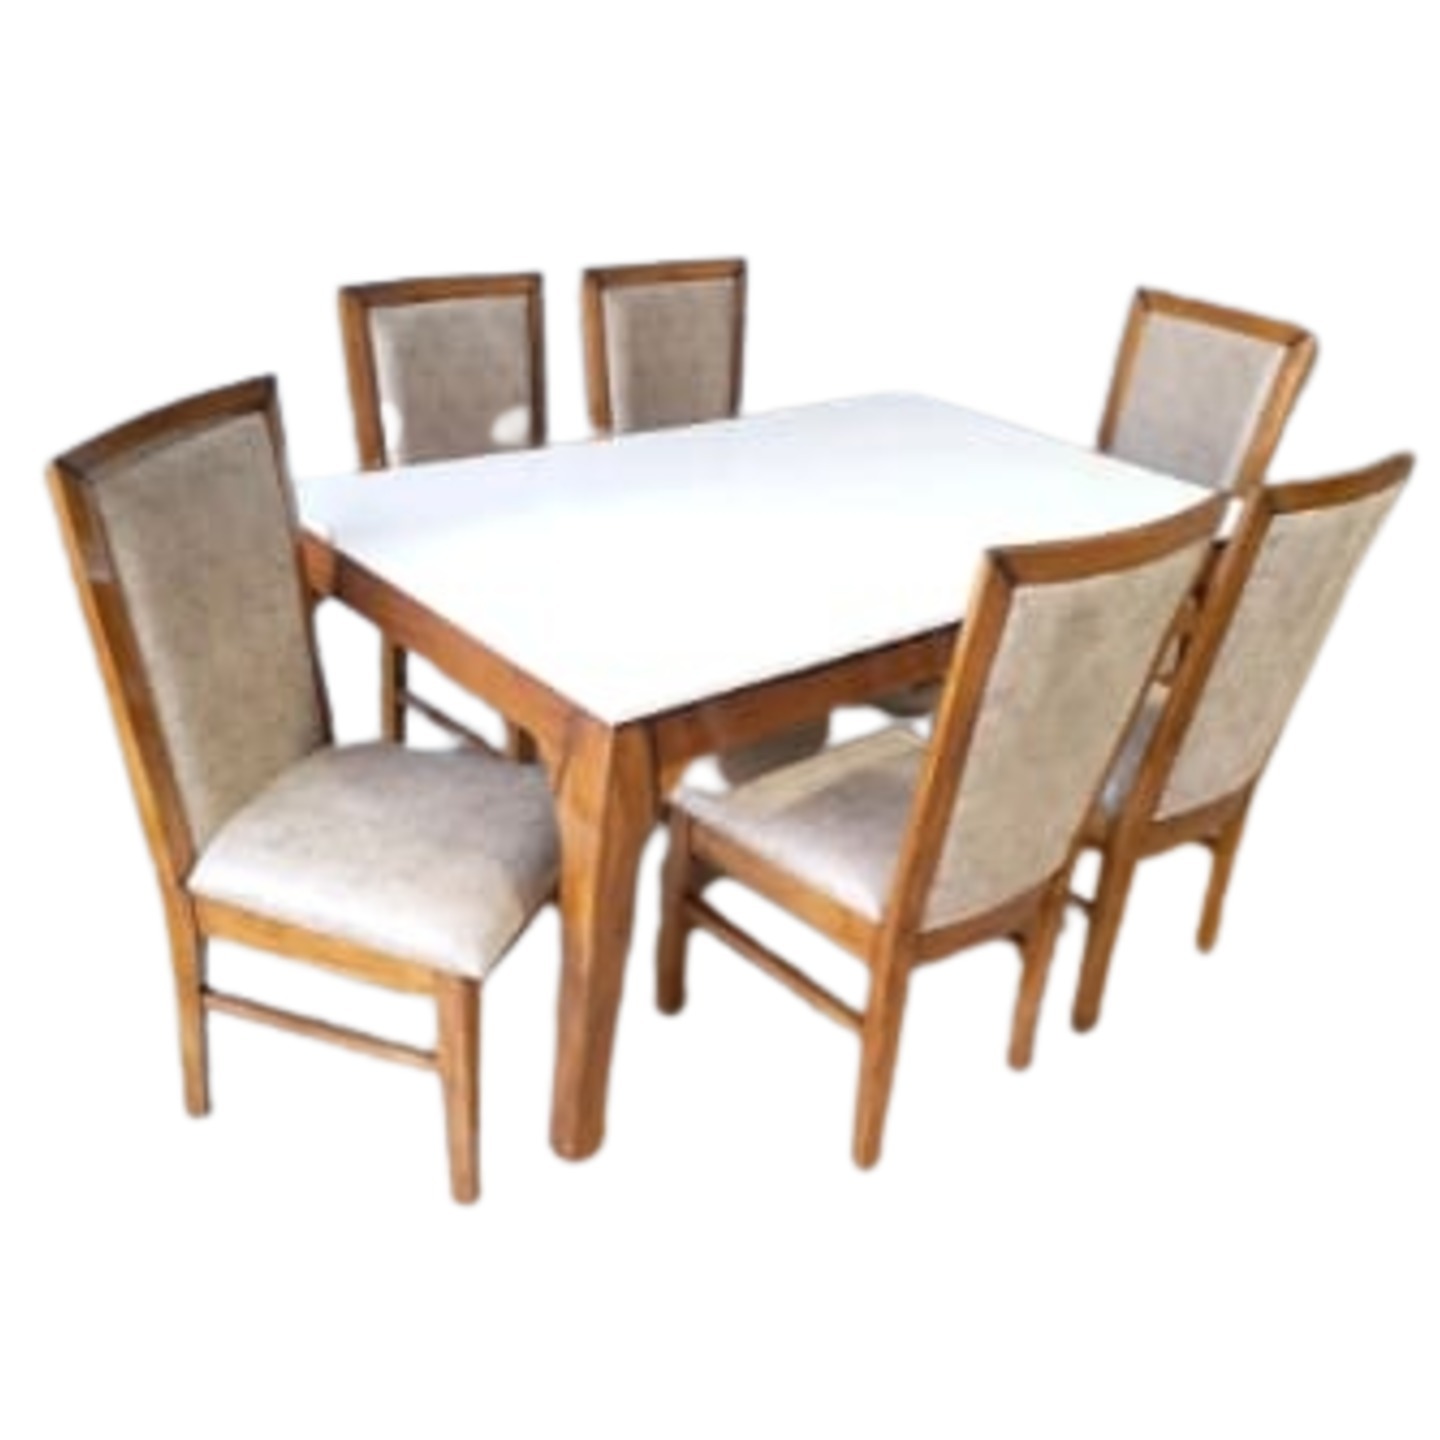 DW Marble Top H-017 Six Seater Dining Table Set in Brown Colour